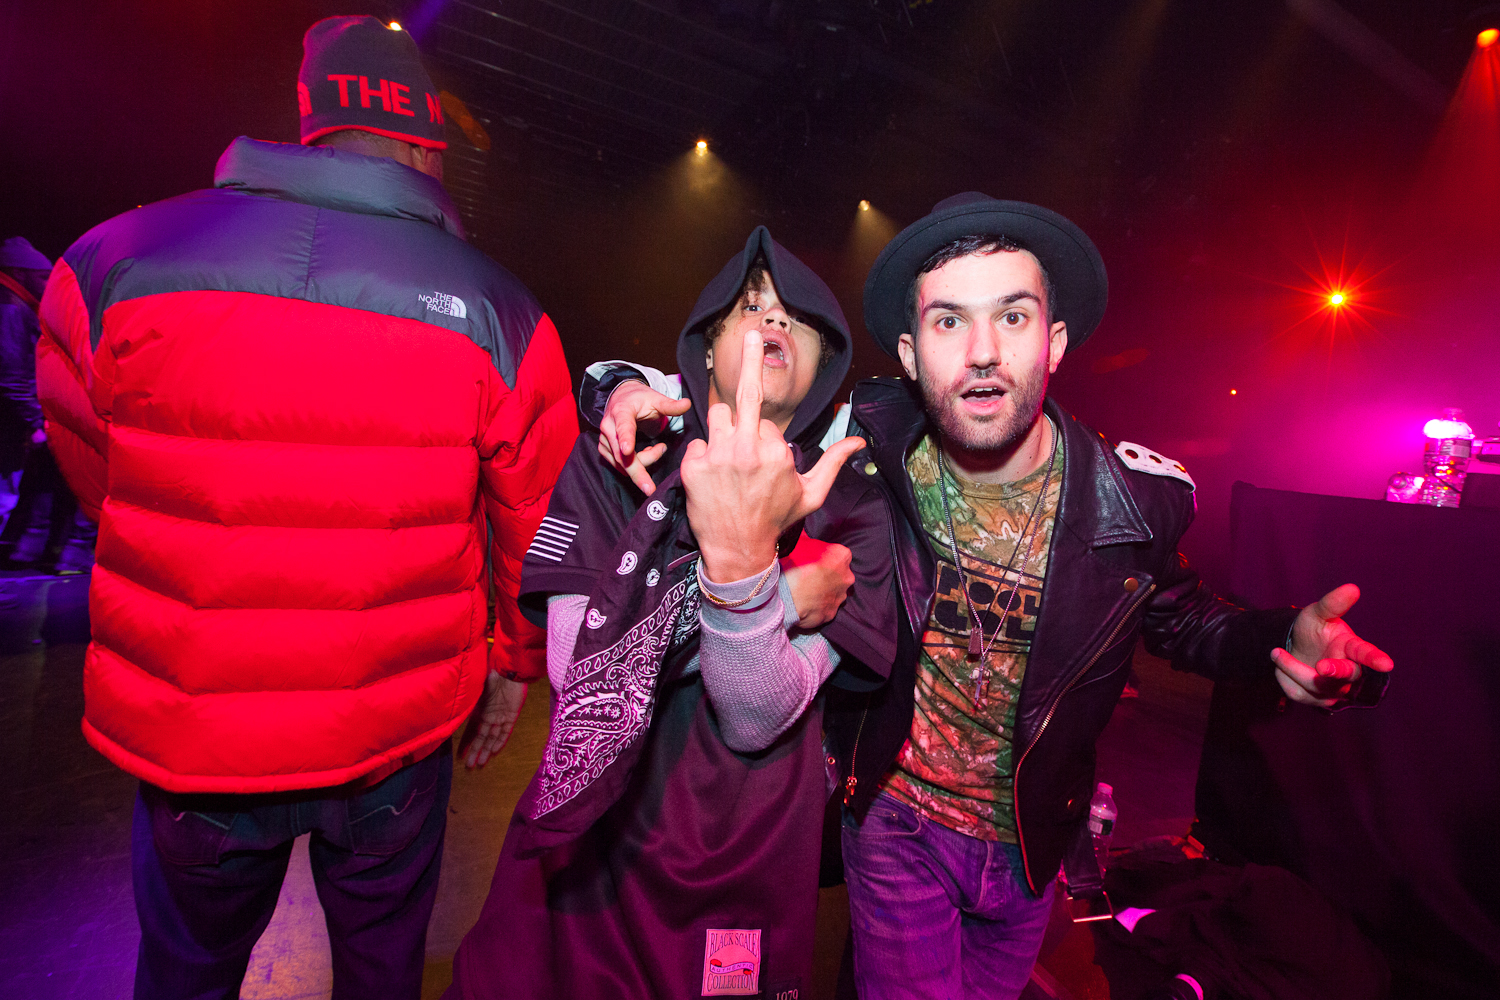 Vibe’s V-Mix featuring A-Trak and A$AP Mob at Best Buy Theater on November 29, 2012